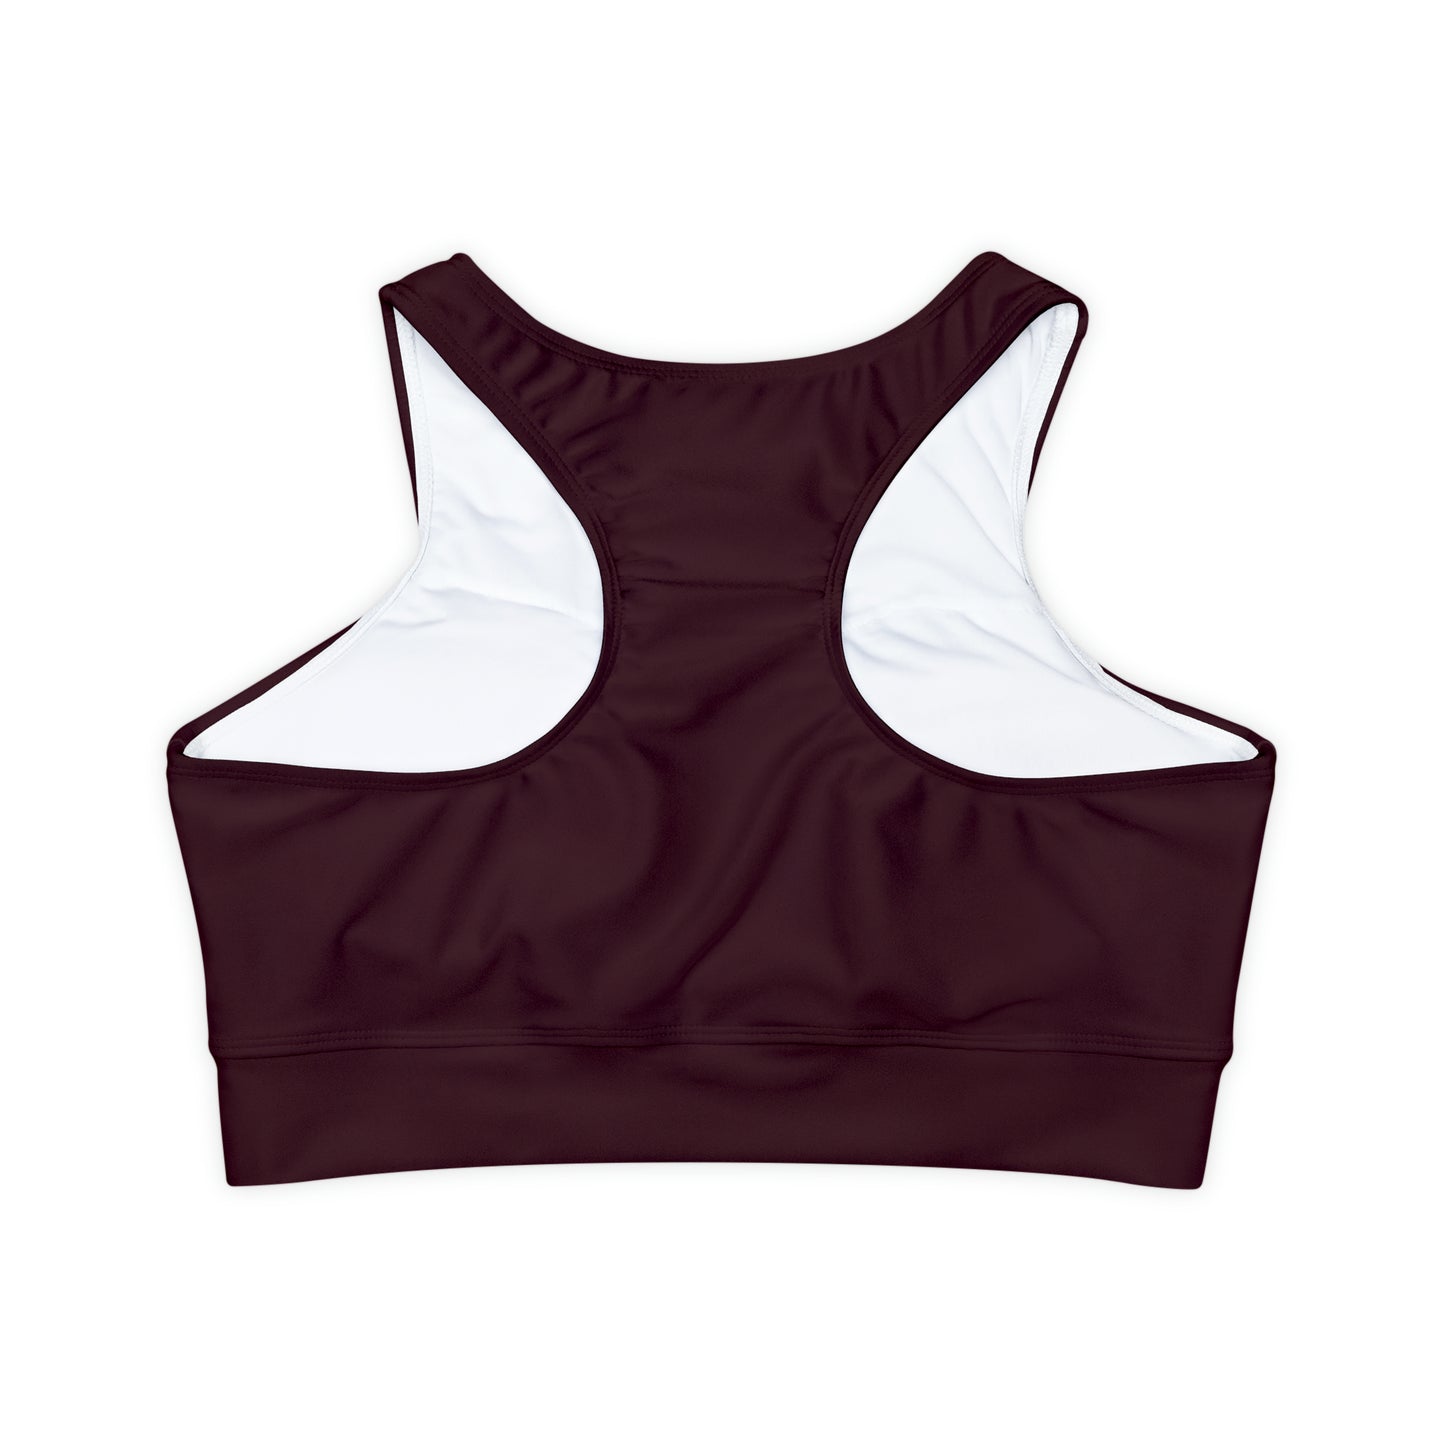 Chocolate Brown Fully Lined, Padded Sports Bra